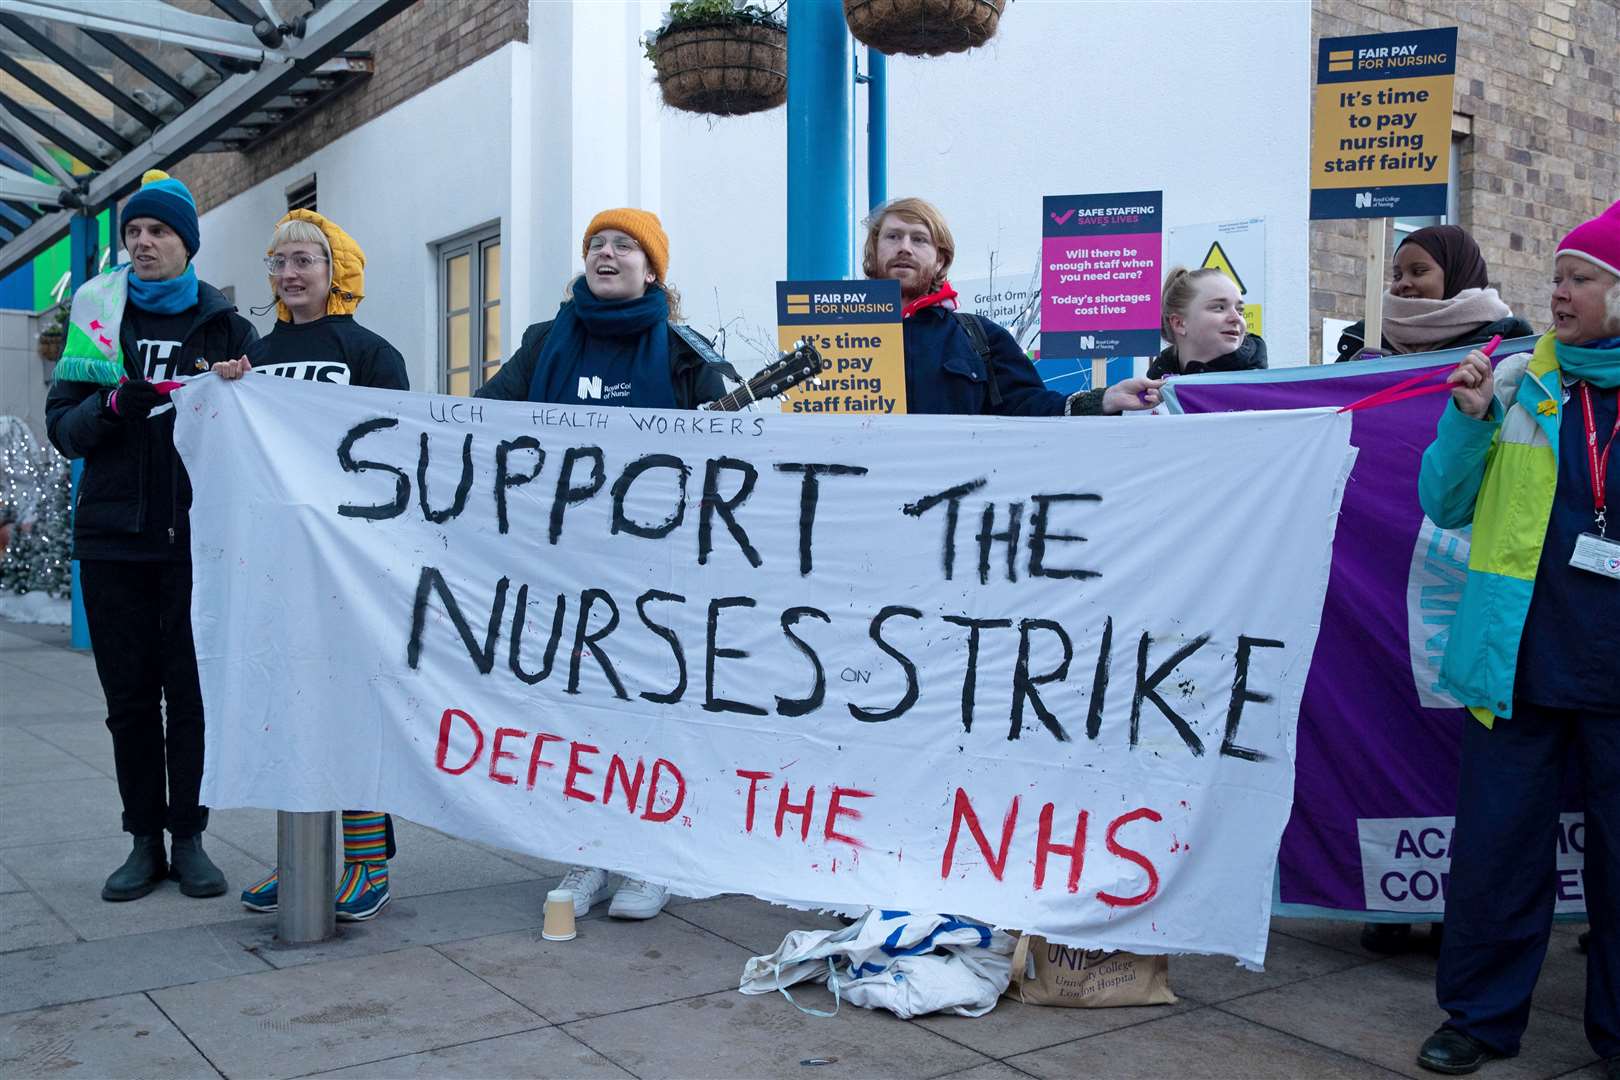 A Royal College of Nursing picket line outside Great Ormond Street Hospital (Lucy North/PA)